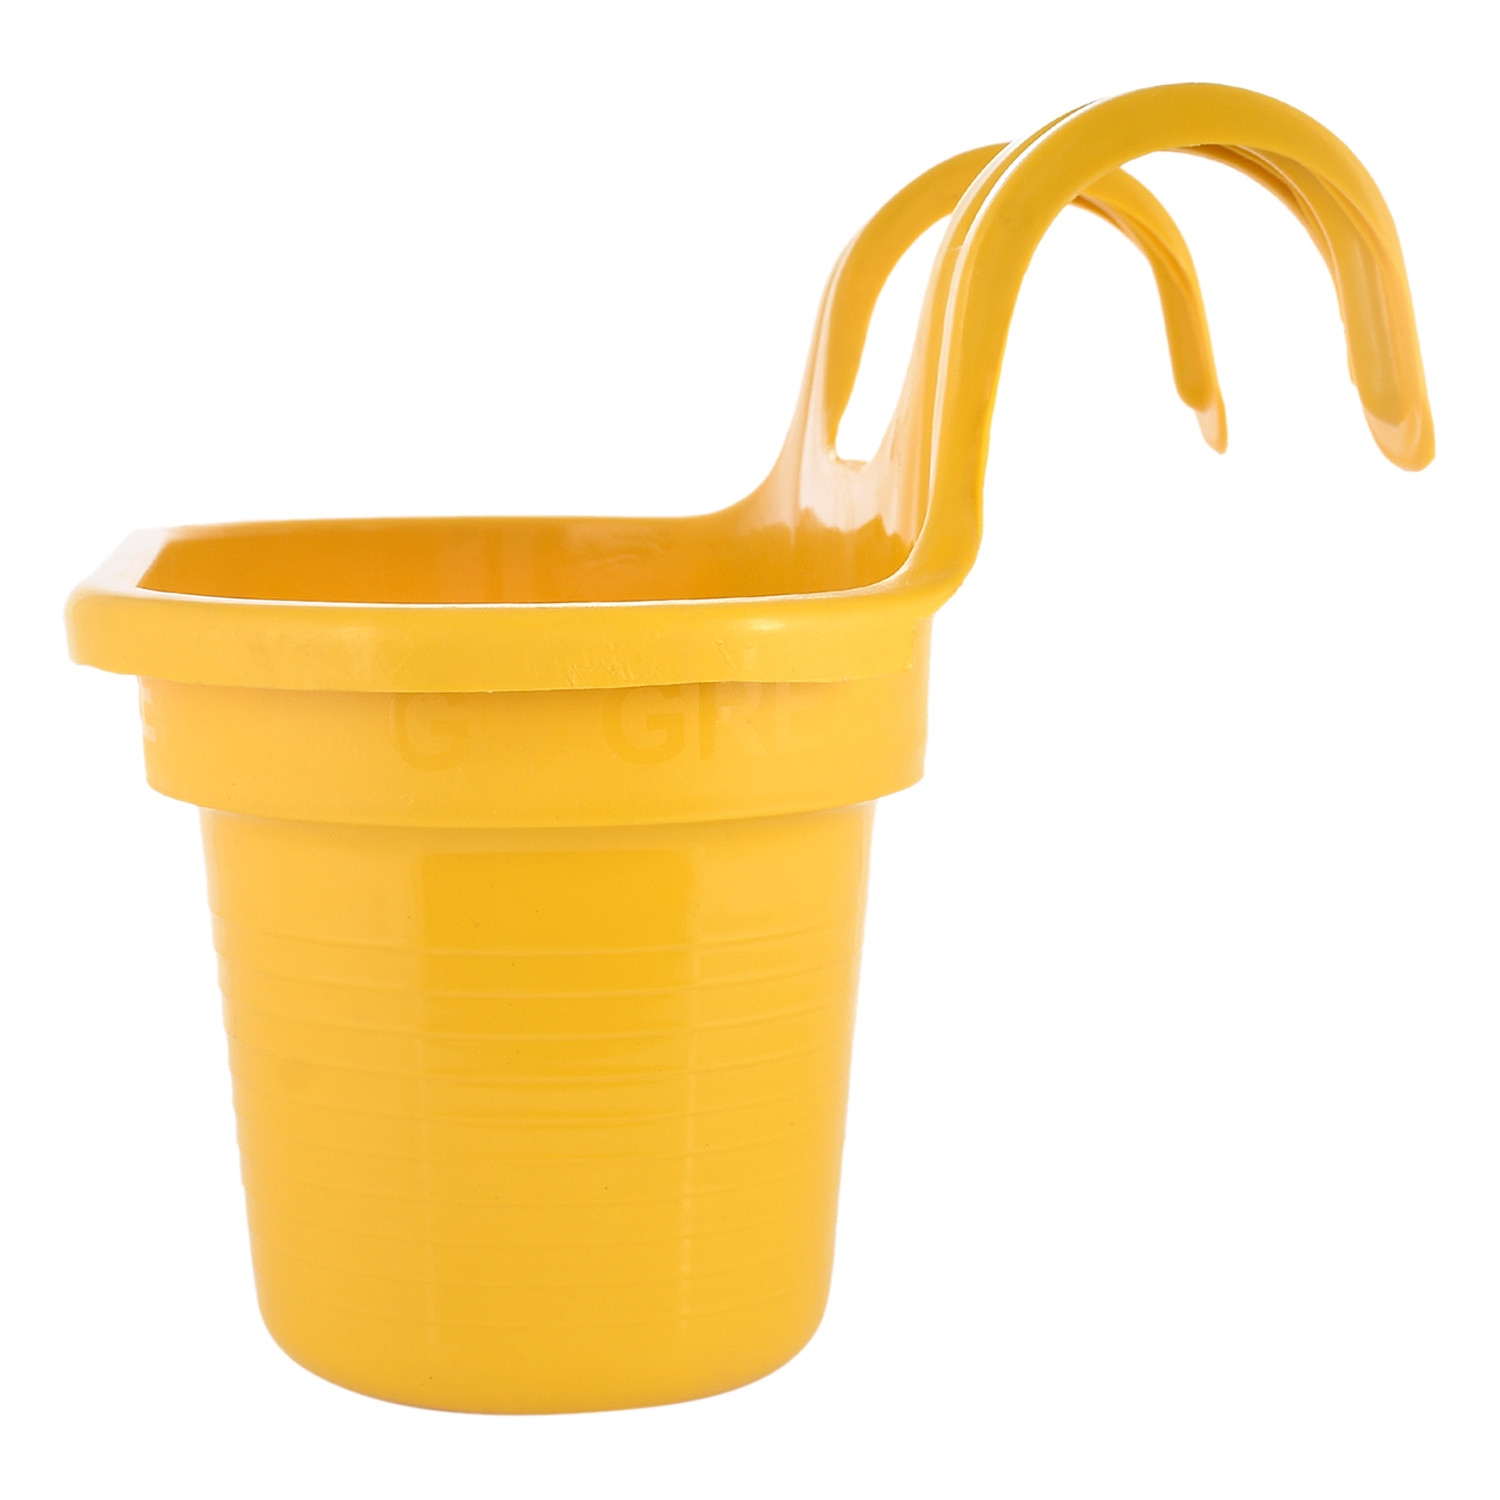 Kuber Industries Hanging Flower Pot|Double Hook Plant Container|Durable Plastic Glossy Finish Pots for Home|Balcony|Garden|12 Inch|Pack of 2 (Yellow & Green)